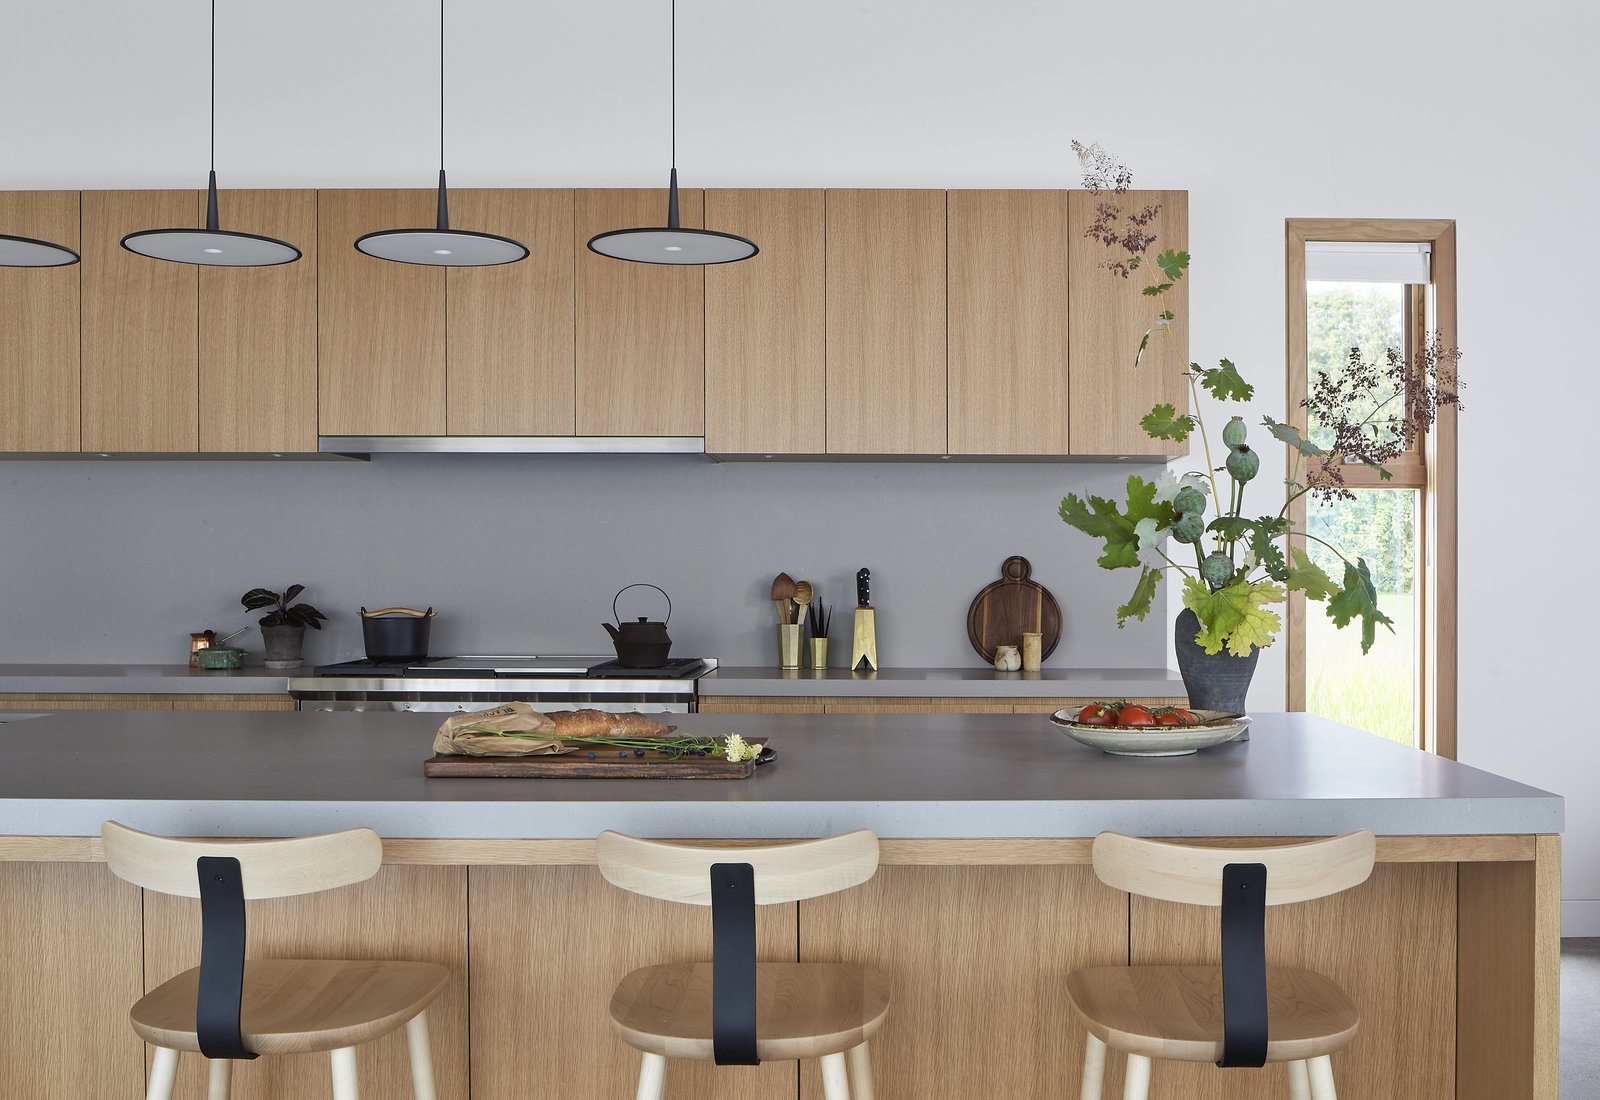 caesarstone-countertops-were-used-in-the-kitchen-skan-by-vibia-pendants-hang-above-the-island.jpg